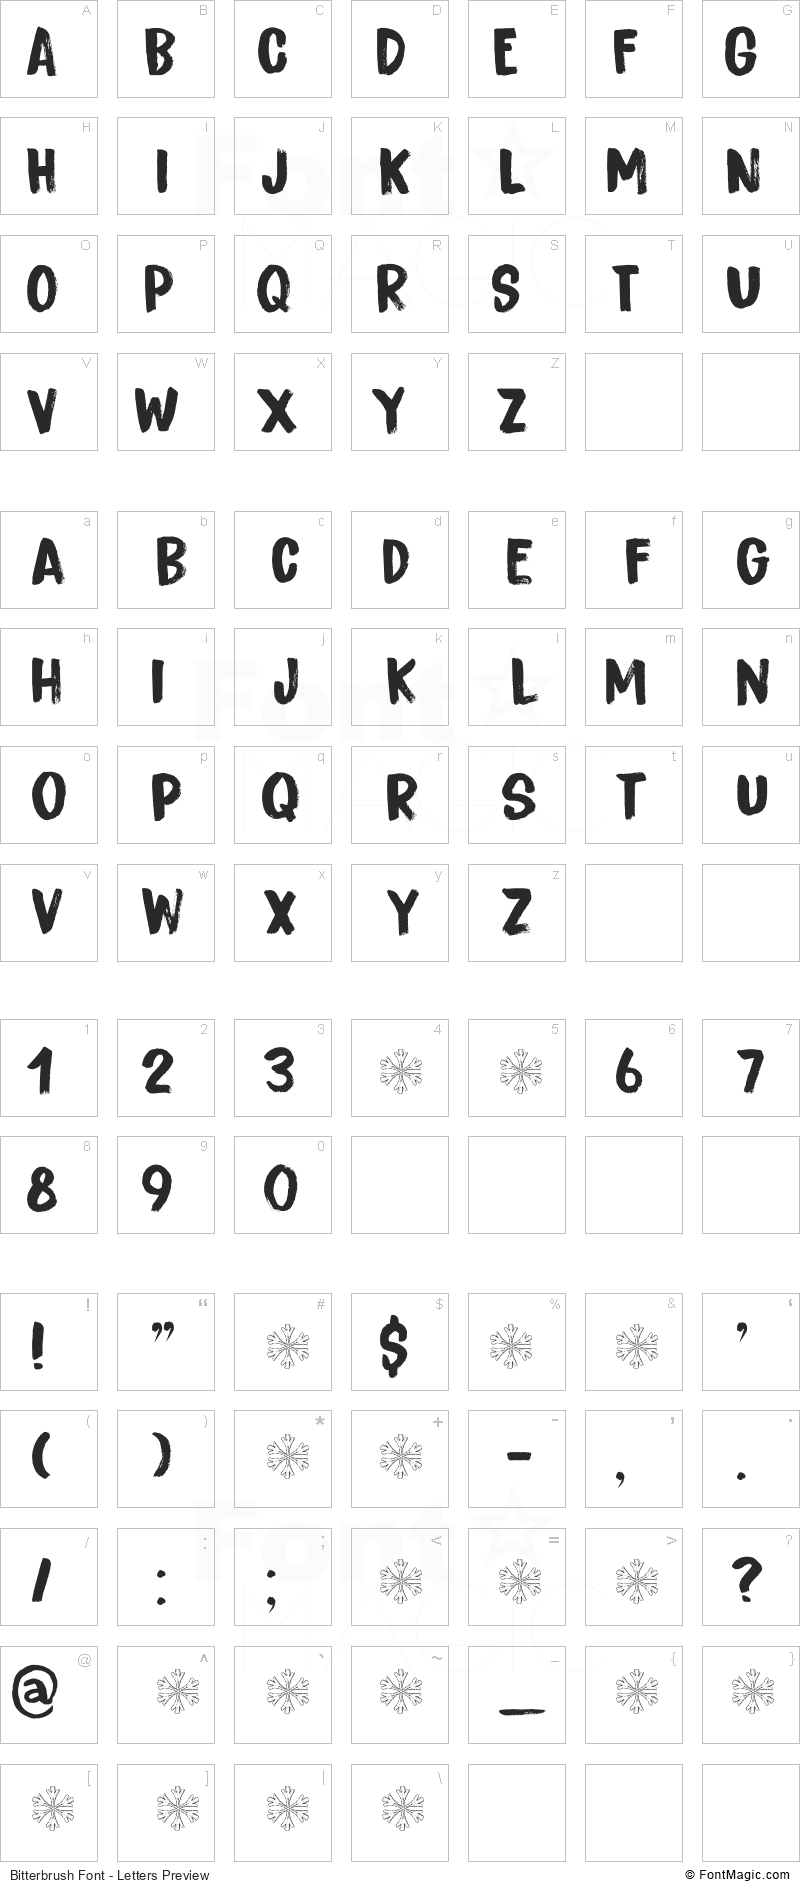 Bitterbrush Font - All Latters Preview Chart